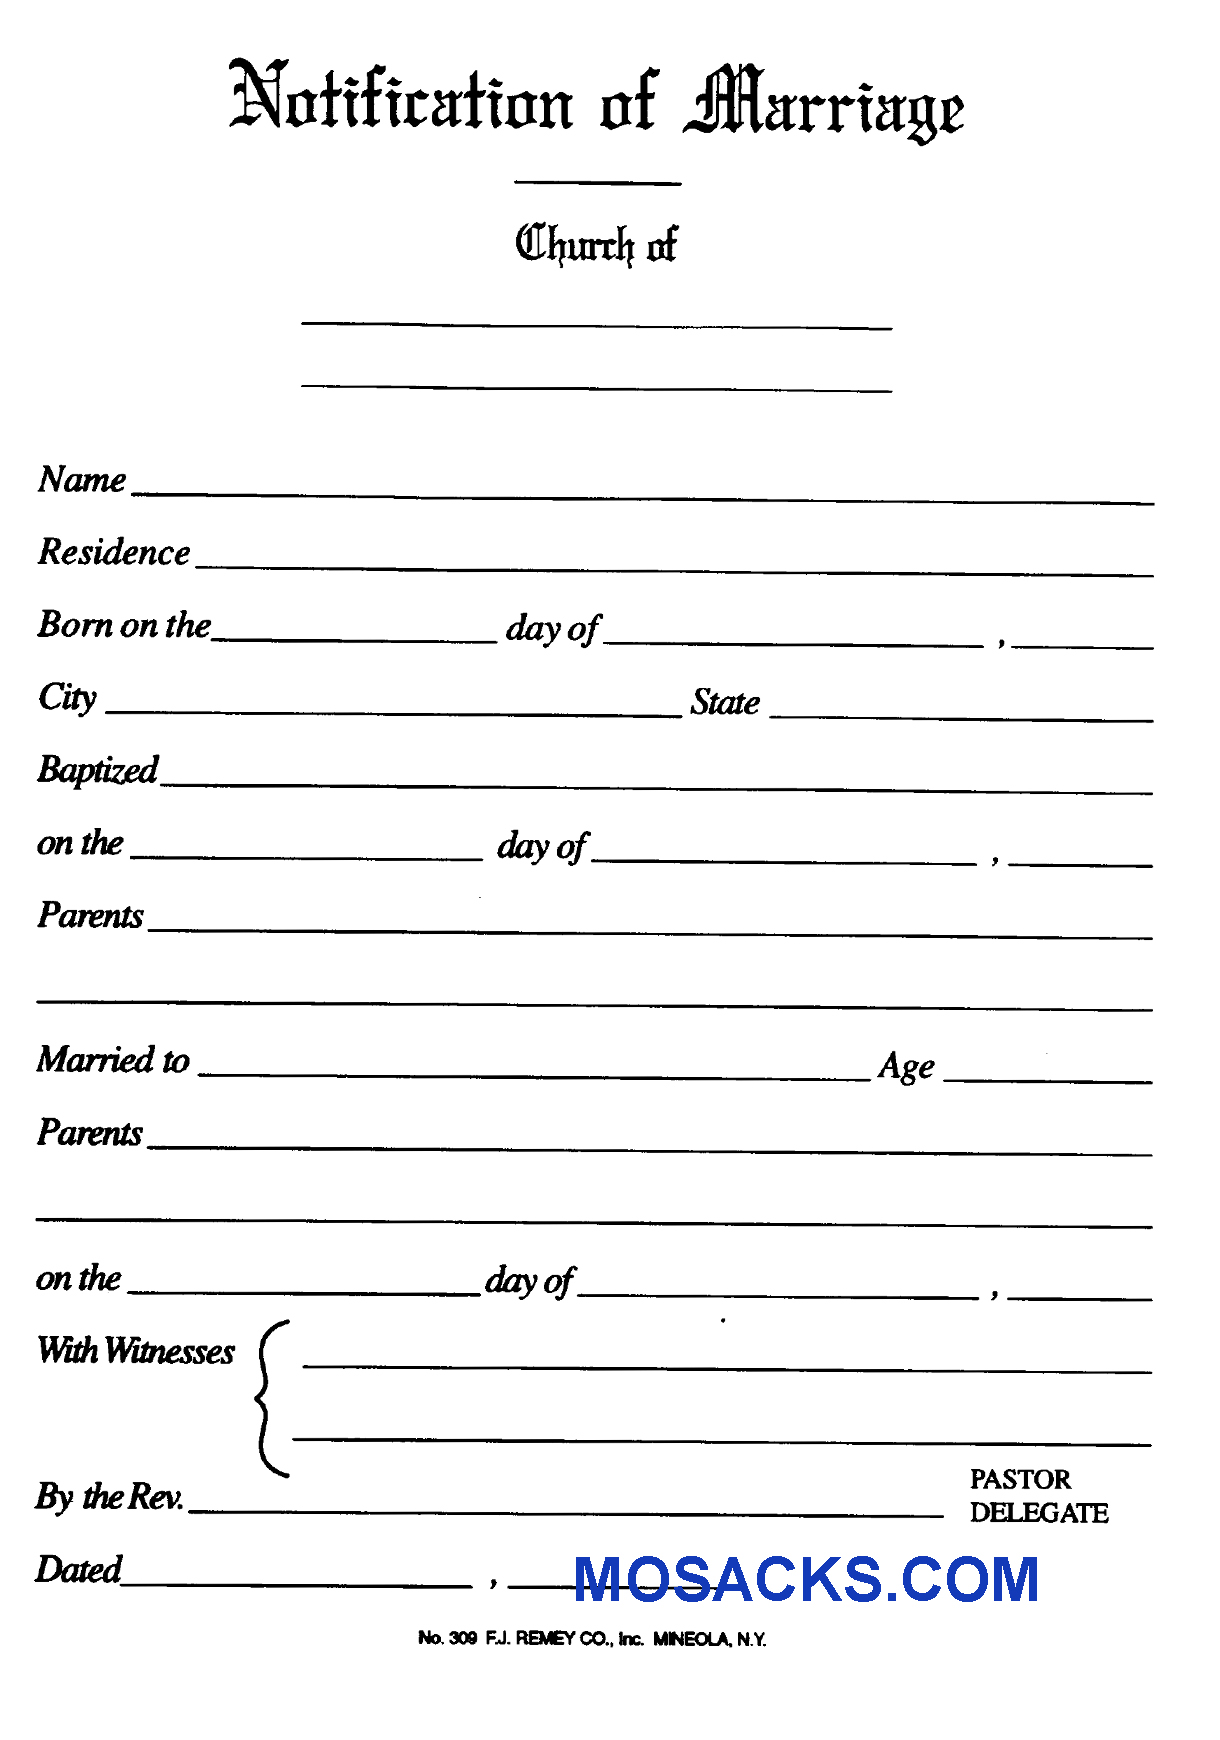 Marriage Notification Simple Form No. 309